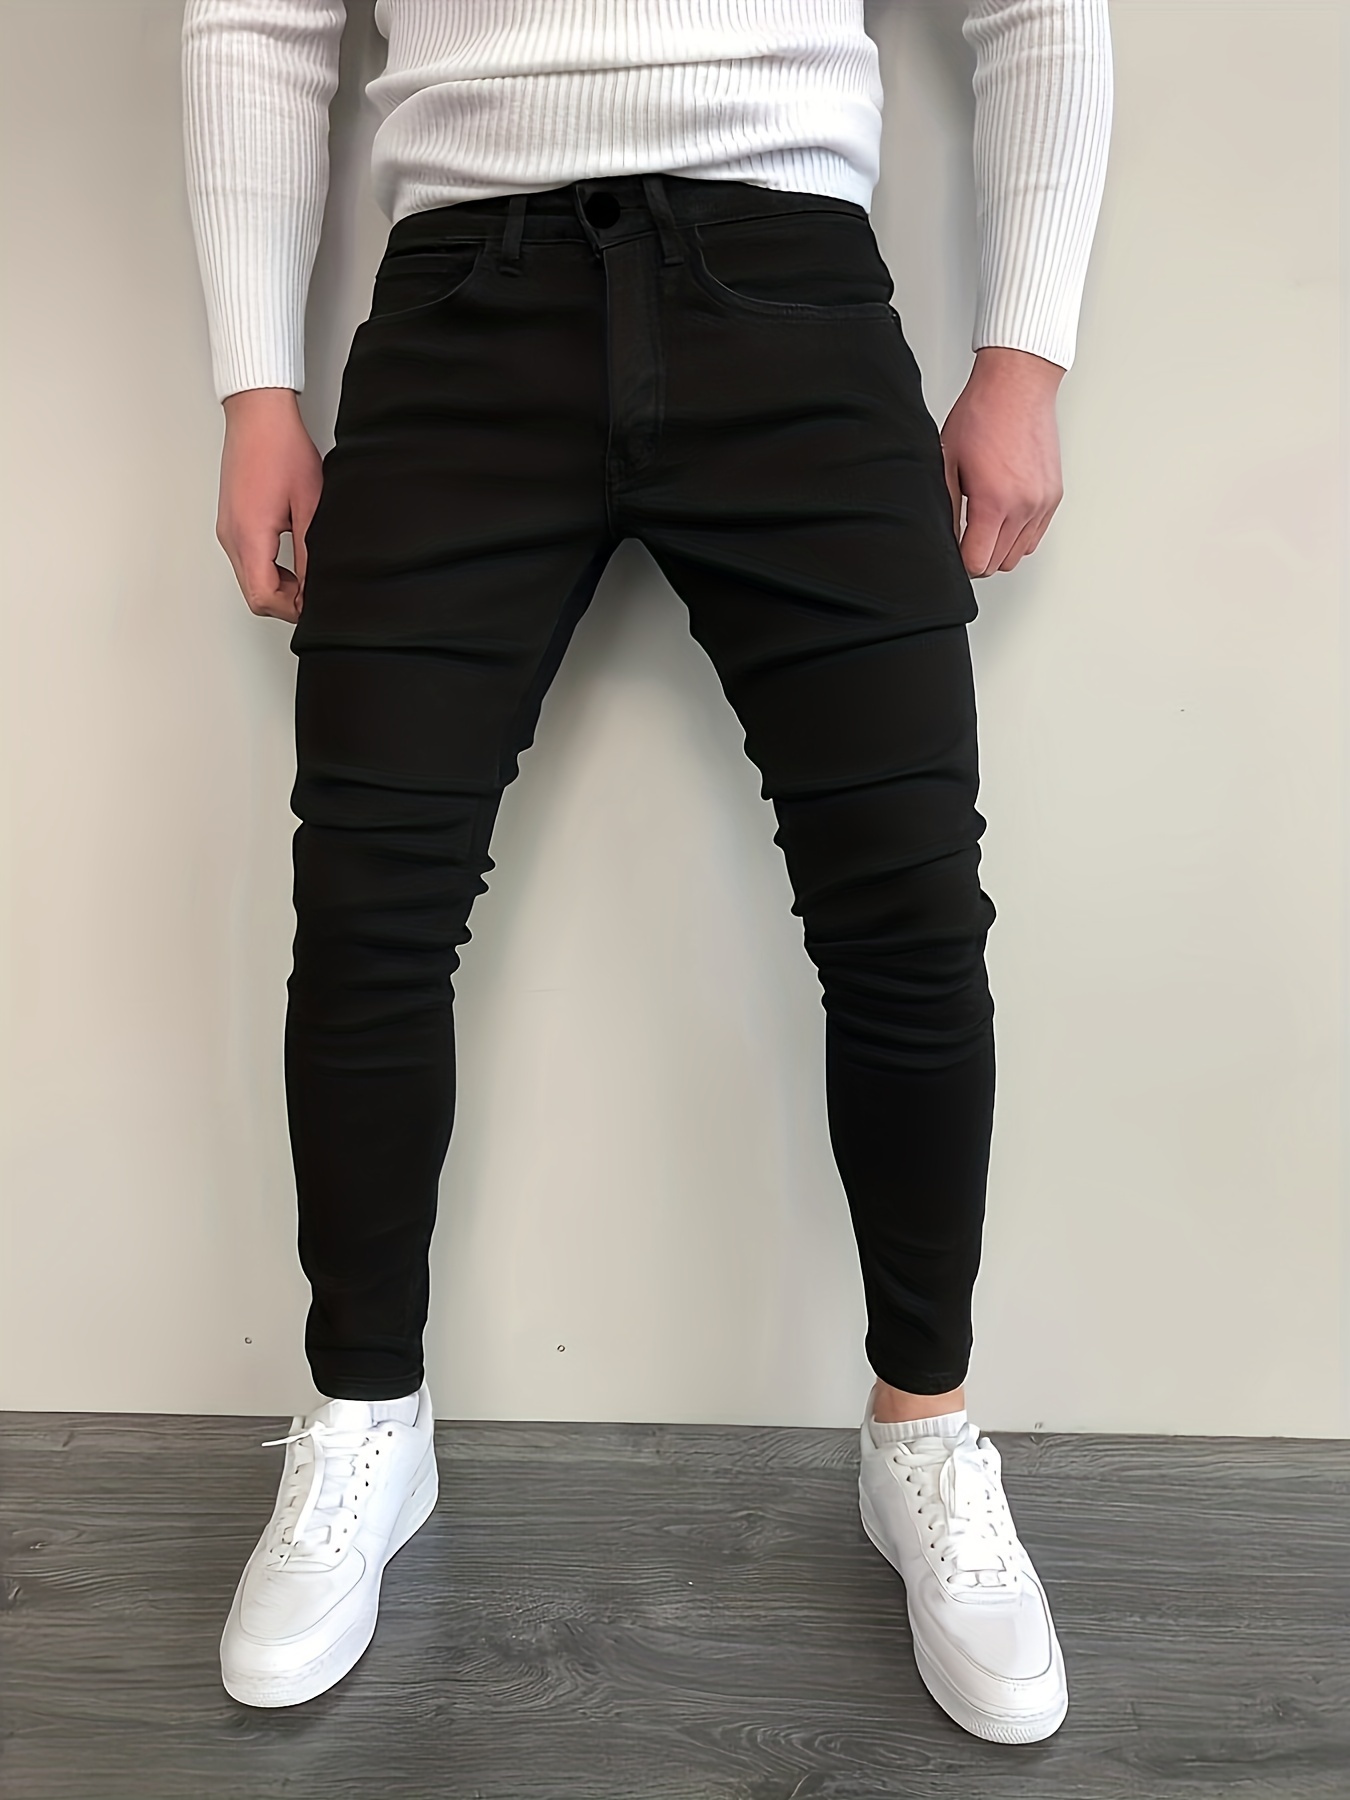 Slim Fit Jeans, Men's Casual Street Style Distressed Mid Stretch Denim  Pants For Spring Summer